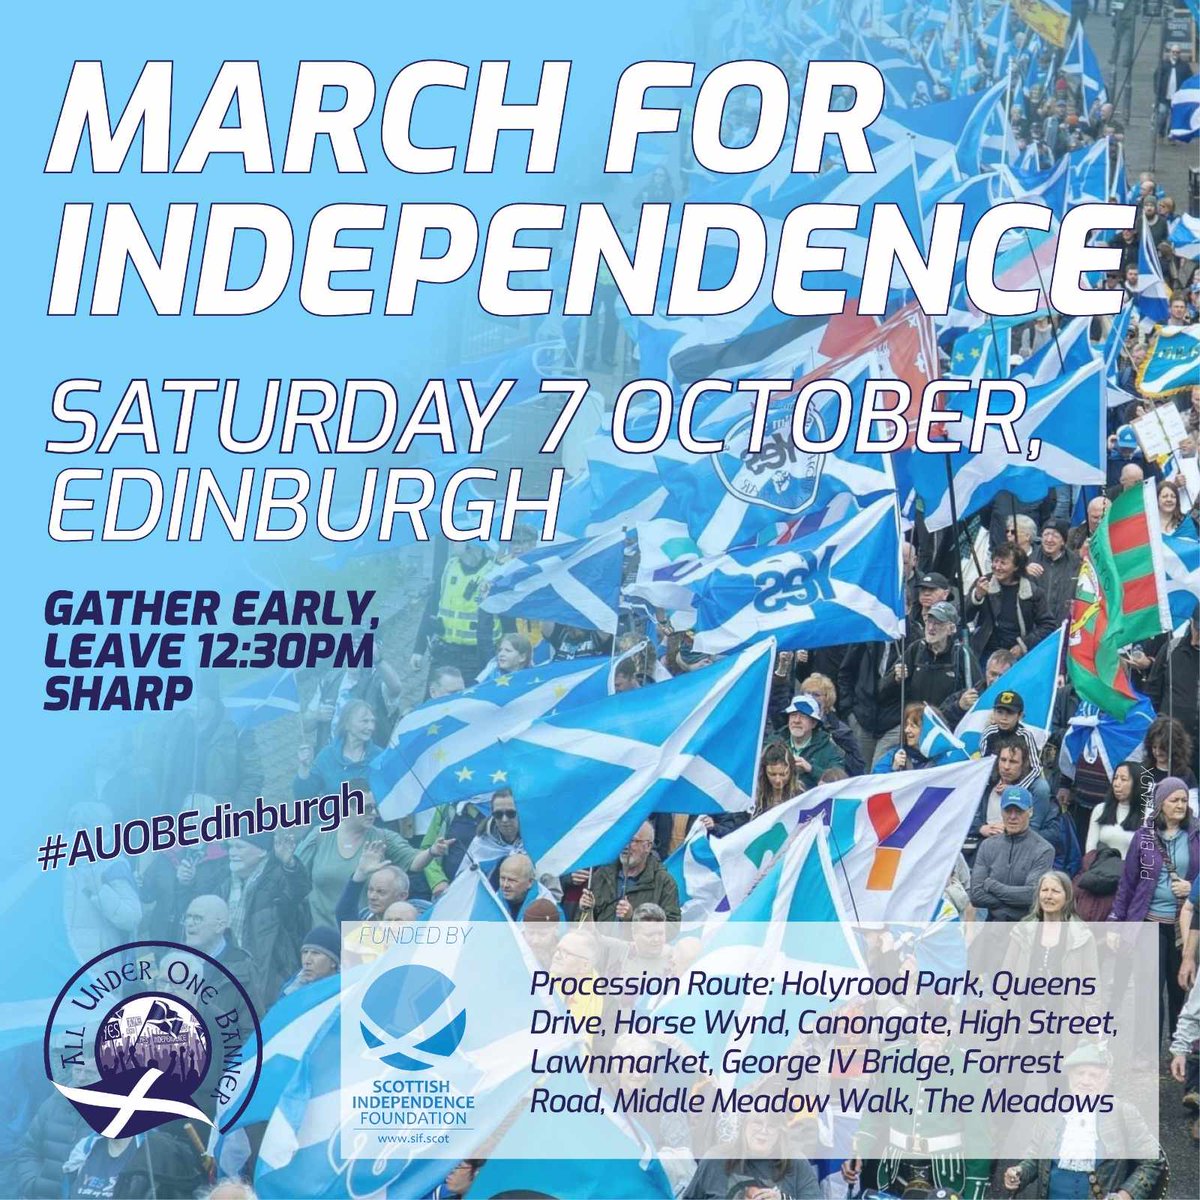 Will you March for Independence at Edinburgh on Saturday 7 October? #AUOBEdinburgh 🏴󠁧󠁢󠁳󠁣󠁴󠁿